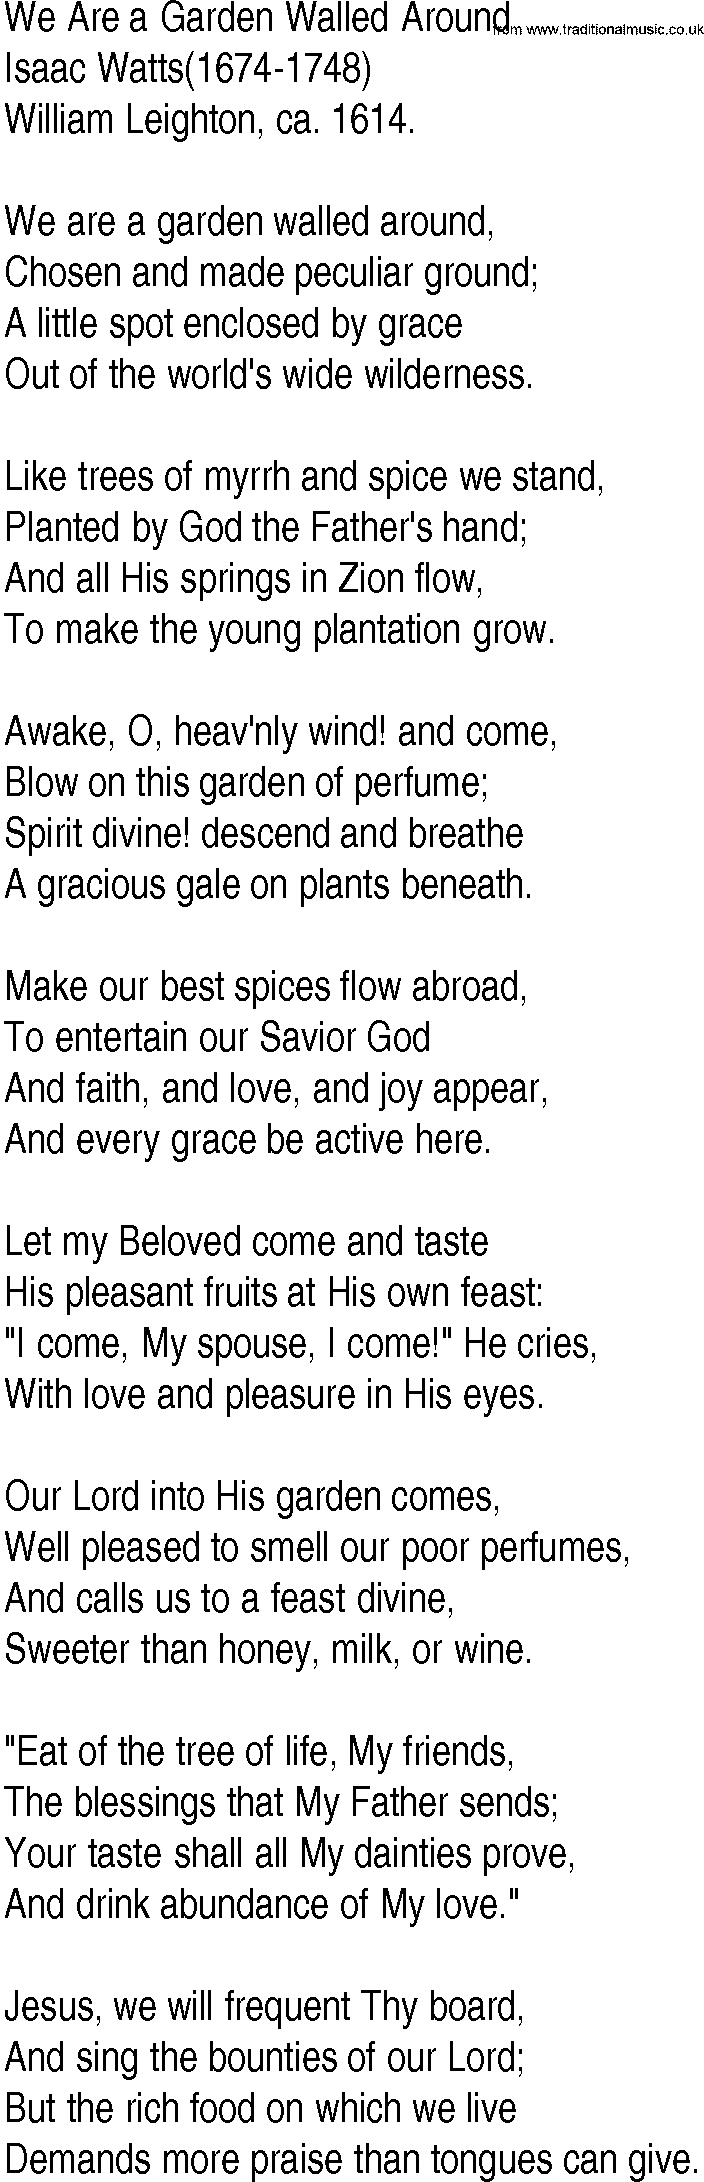 Hymn and Gospel Song: We Are a Garden Walled Around by Isaac Watts lyrics